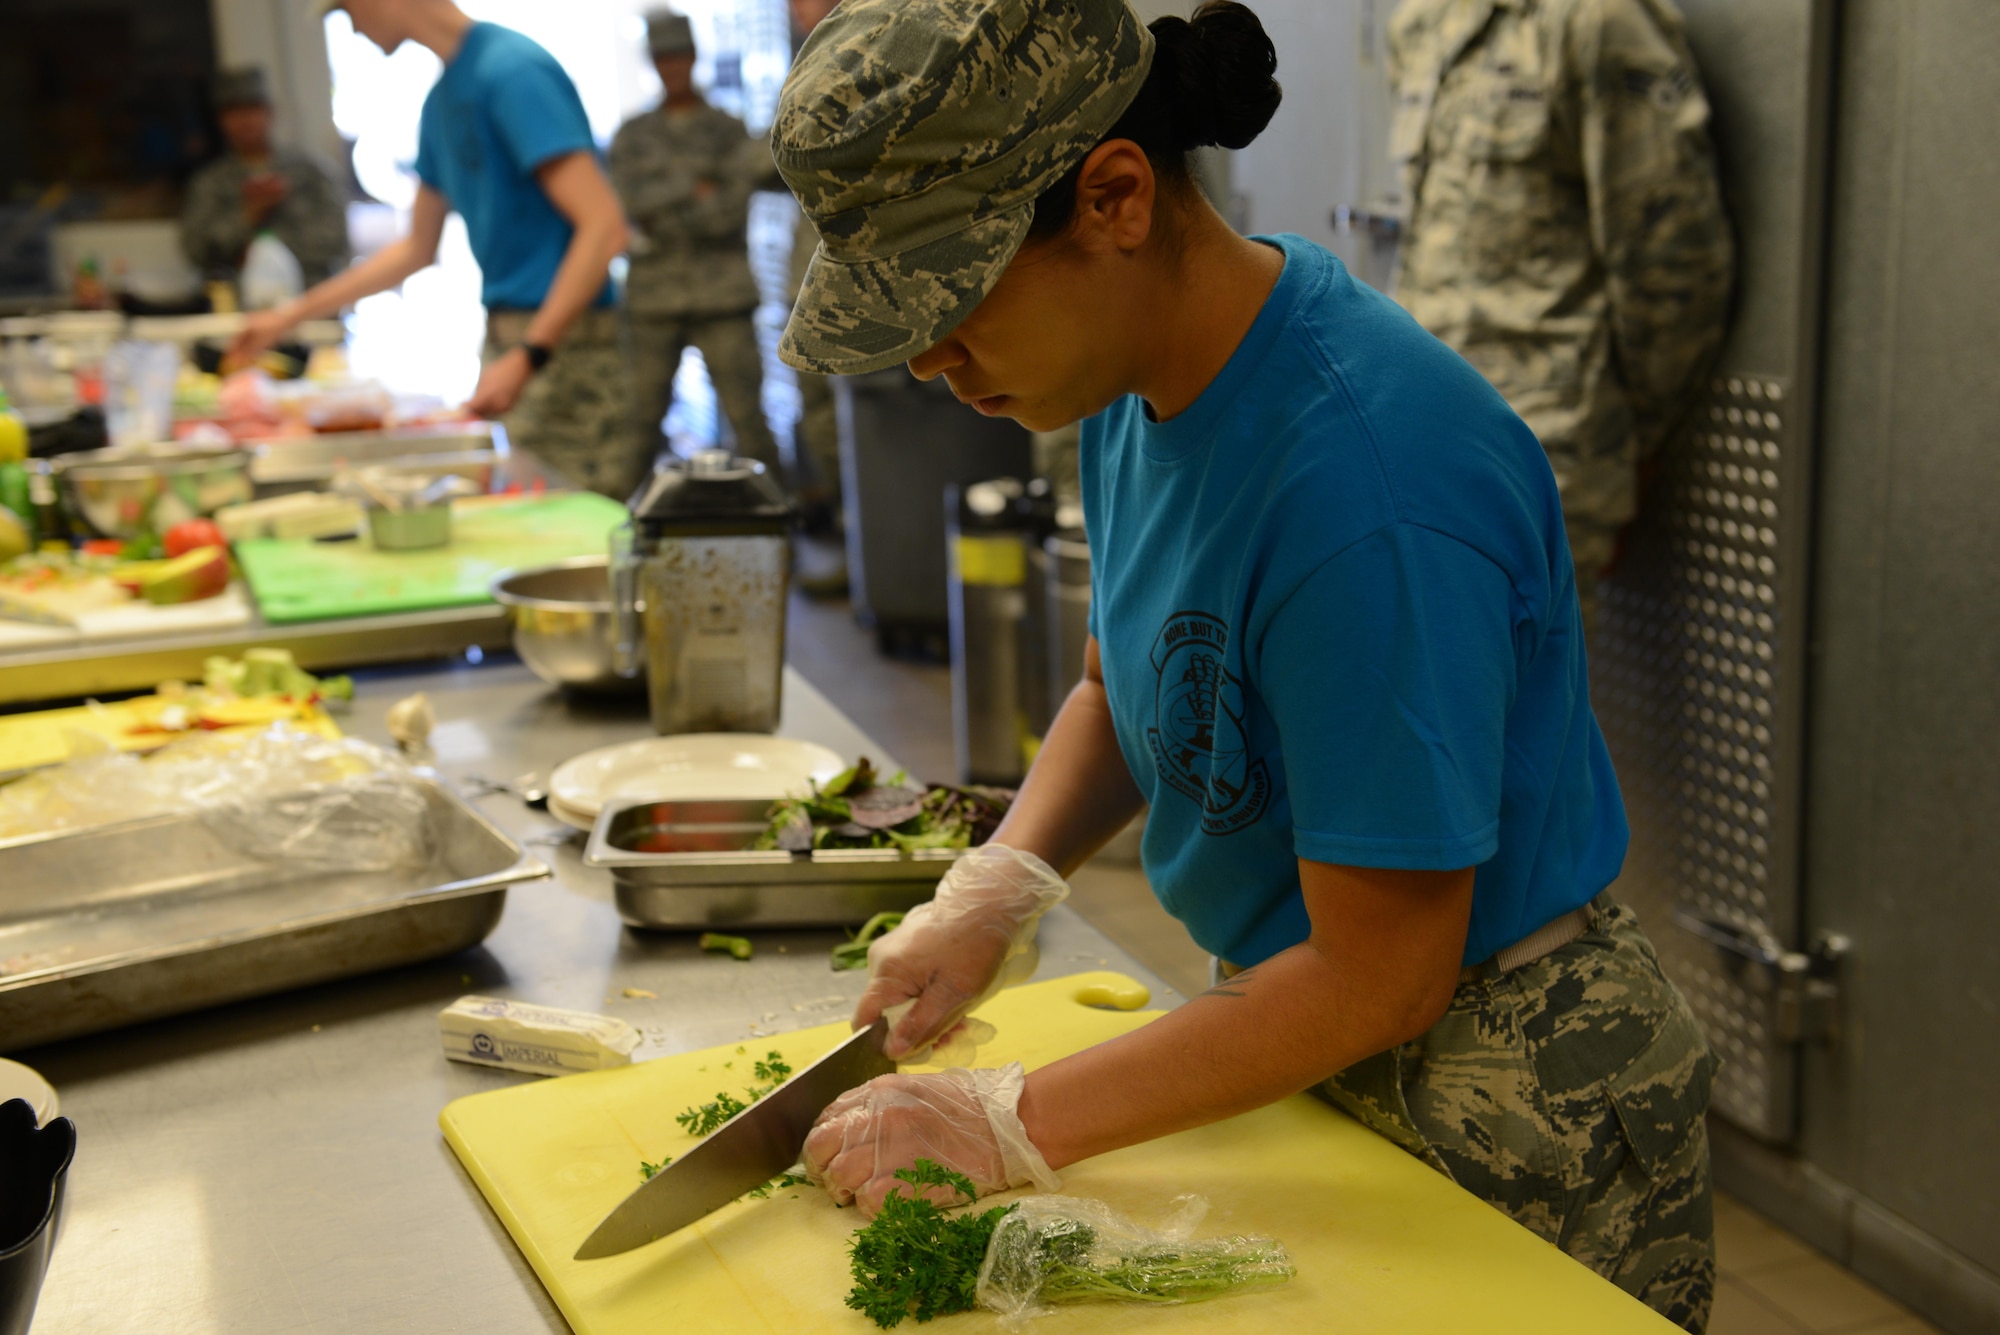 Staff Sgt. Amber Sansone, 341st Force Support Squadron missile chef, cuts parsley during the Warrior Chef competition June 7, 2017 at Malmstrom Air Force Base, Mont. Sansone and Airman 1st Class Nicki Agunos, 341st FSS missile chef, worked on the same team and won the competition. (U.S. Air Force photo/Staff Sgt. Delia Marchick)